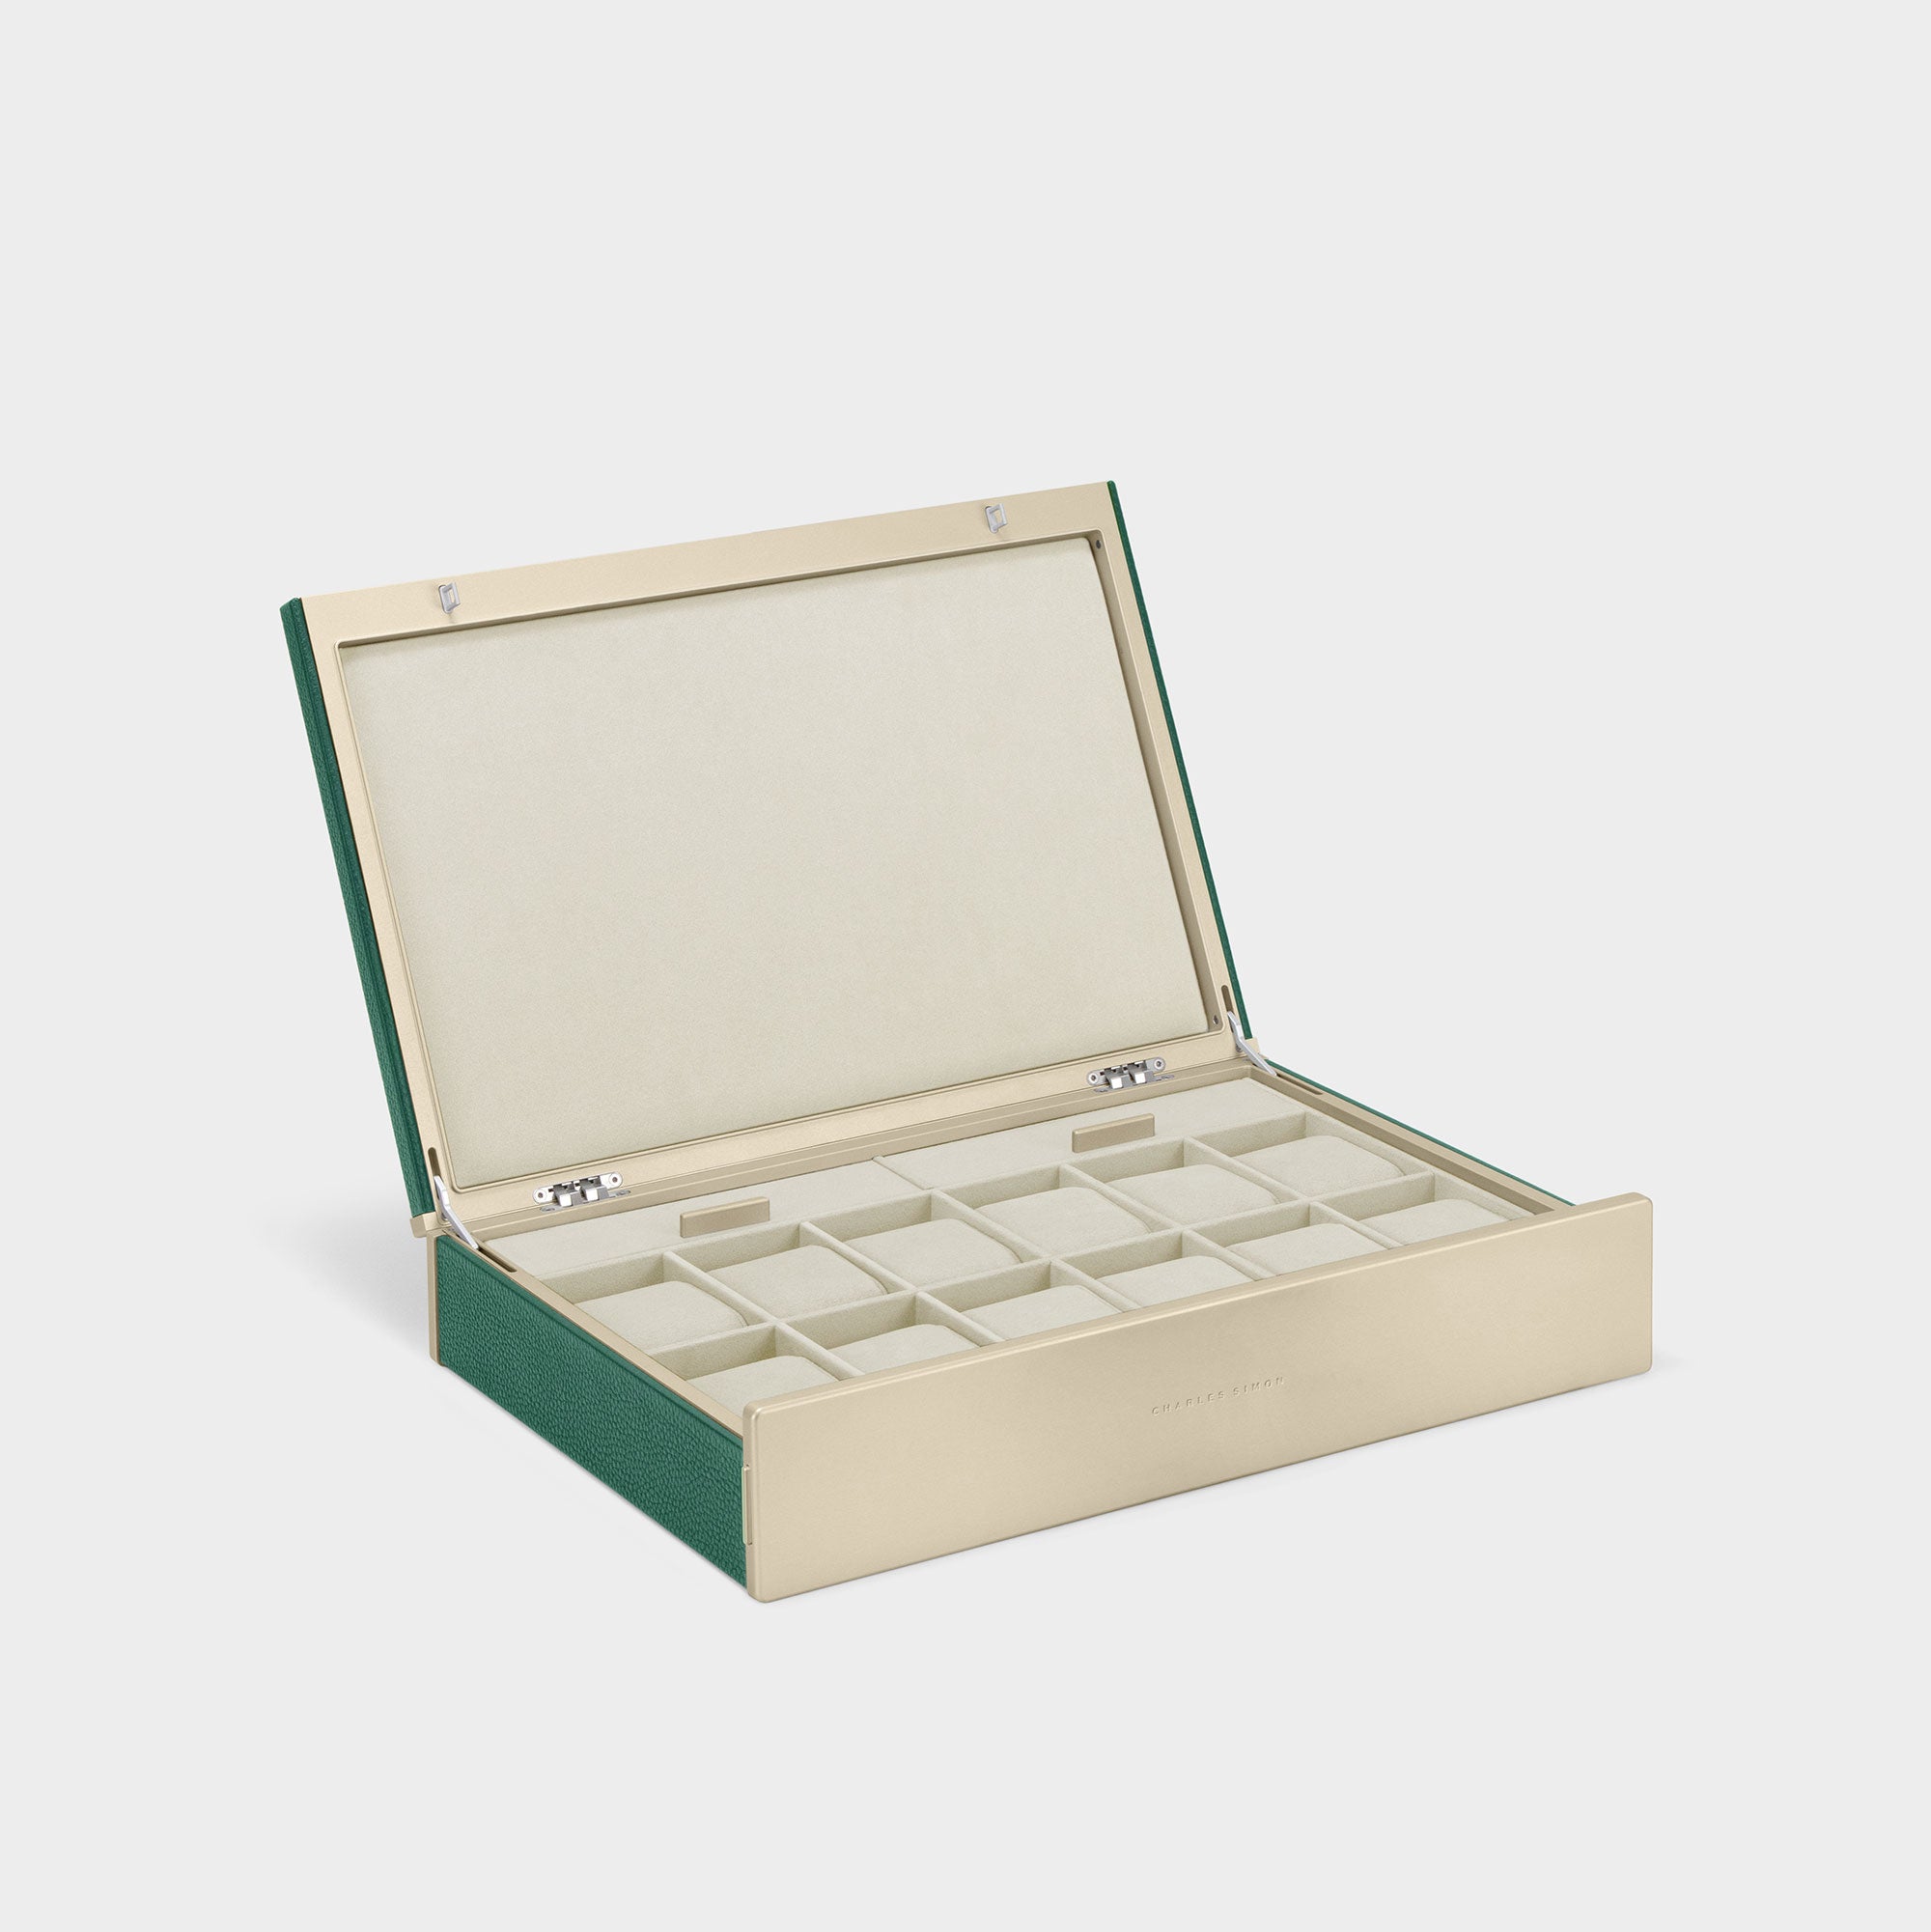 Product photo of Spence 12 Watch box in emerald leather and eggshell interior for up to 12 watches